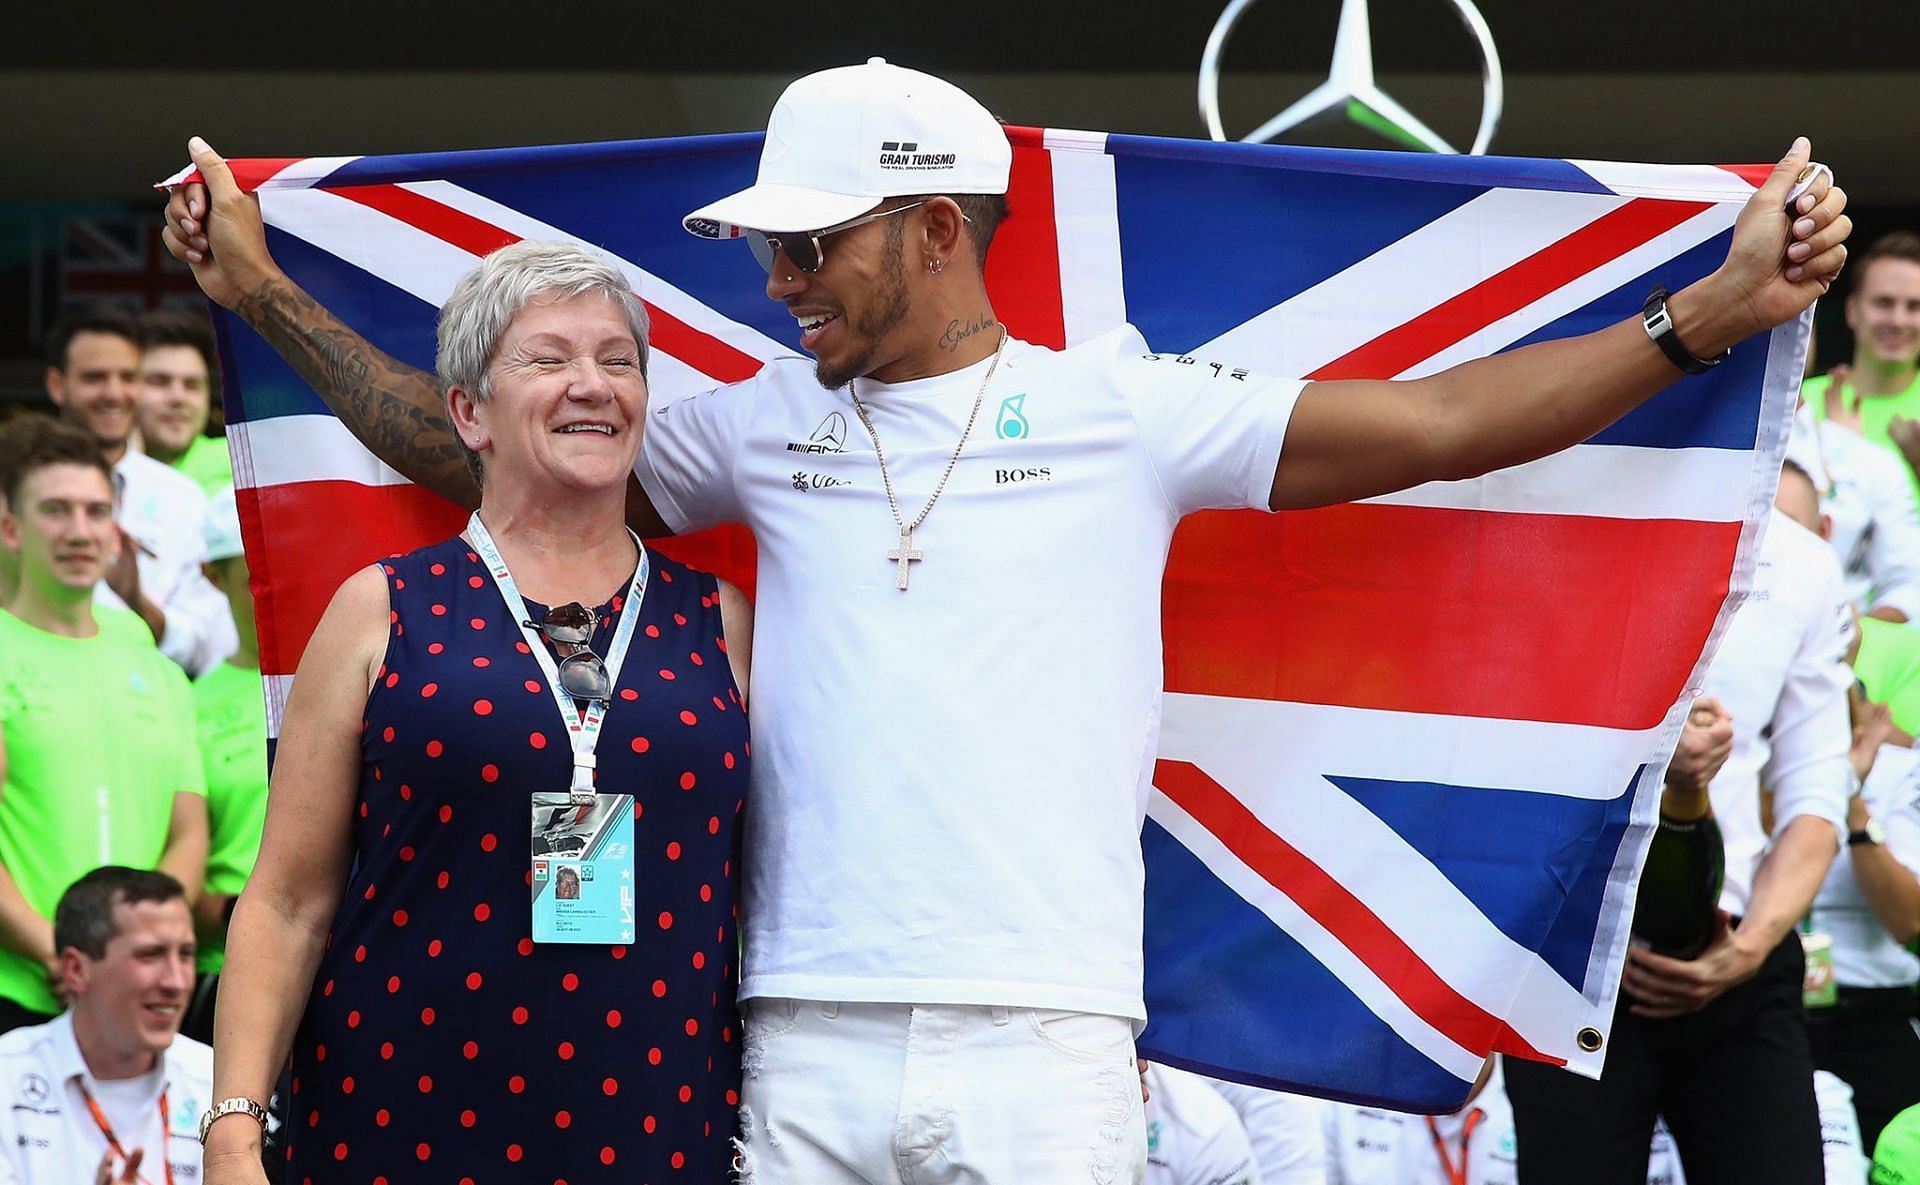 Lewis Hamilton with his biological mother, Carmen